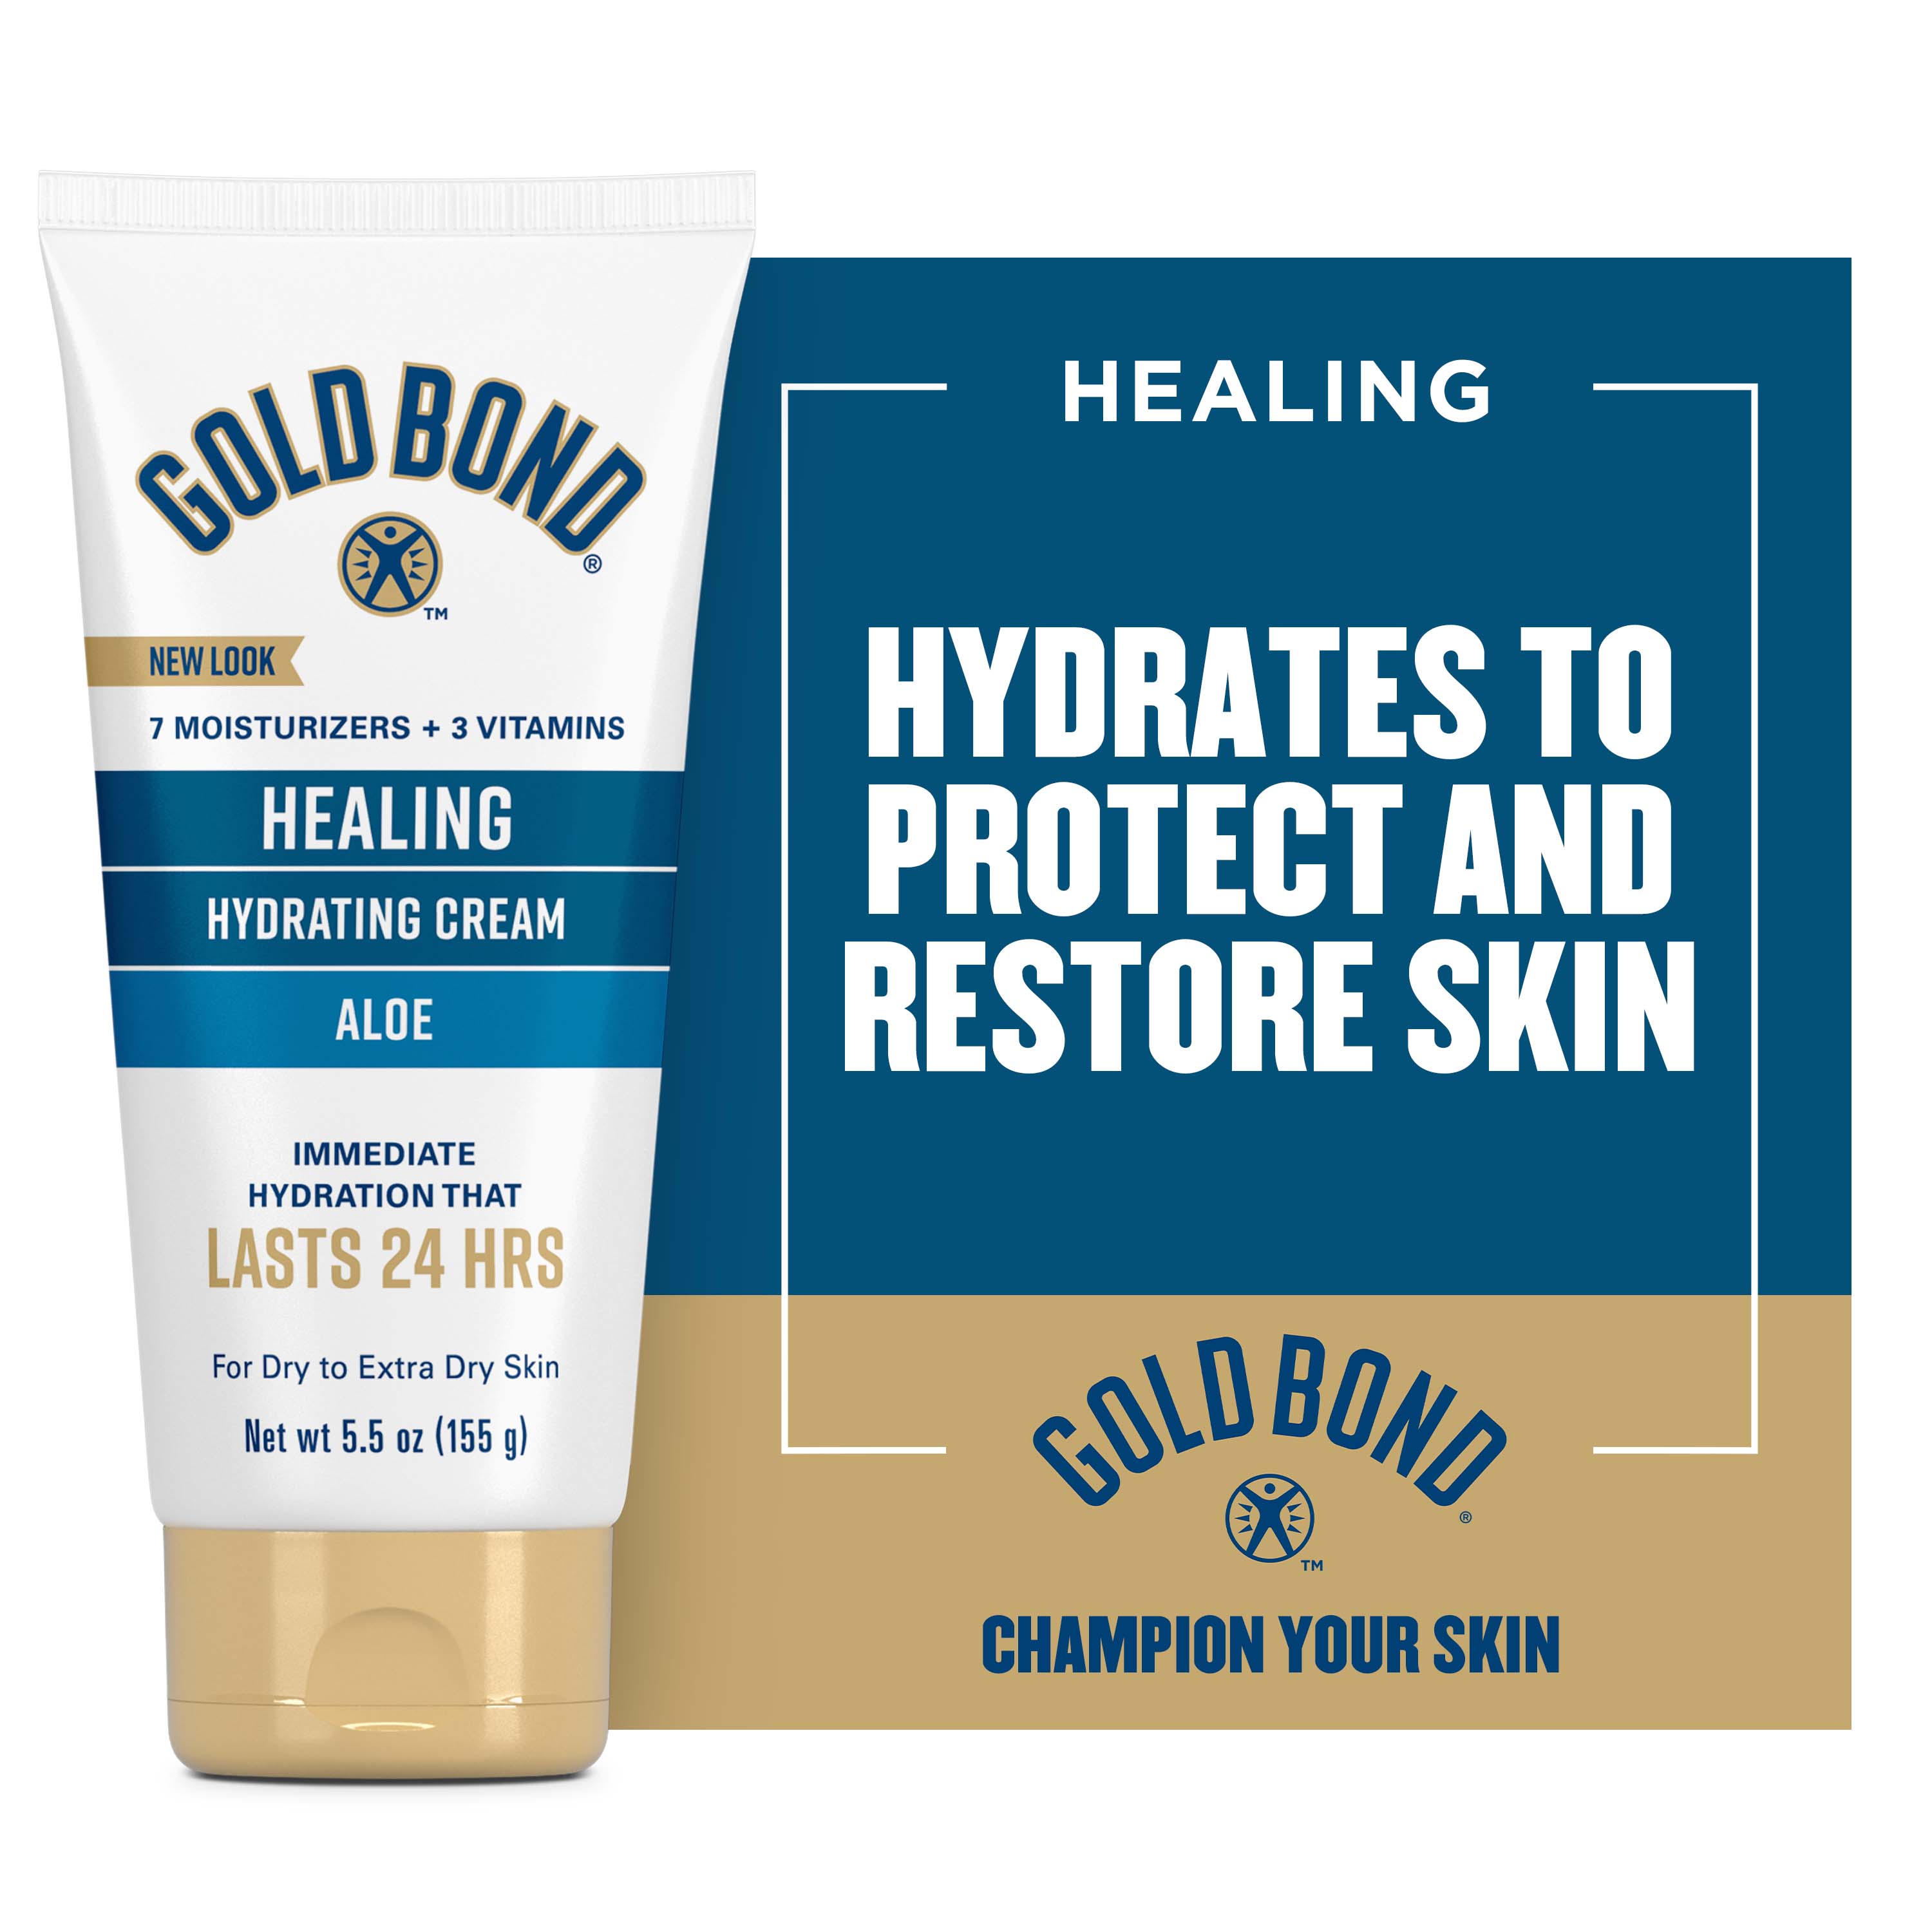 Gold Bond Healing Hydrating Hand and Body Lotion Cream for Dry to Extra Dry Skin, 5.5 oz - image 3 of 9